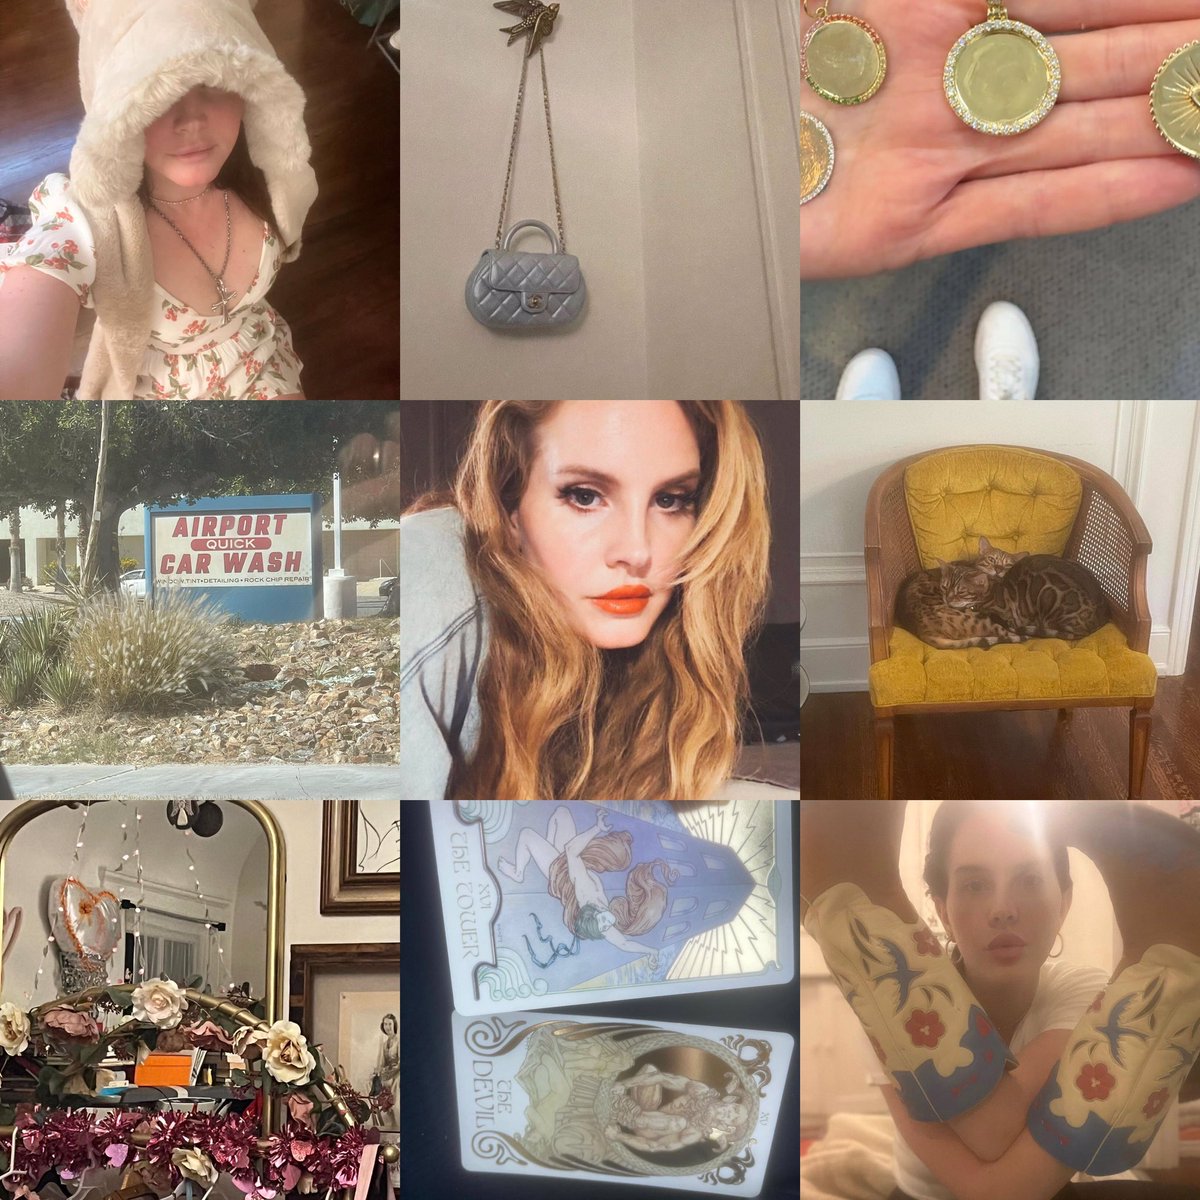 obsessed with lana del rey’s insta dumps